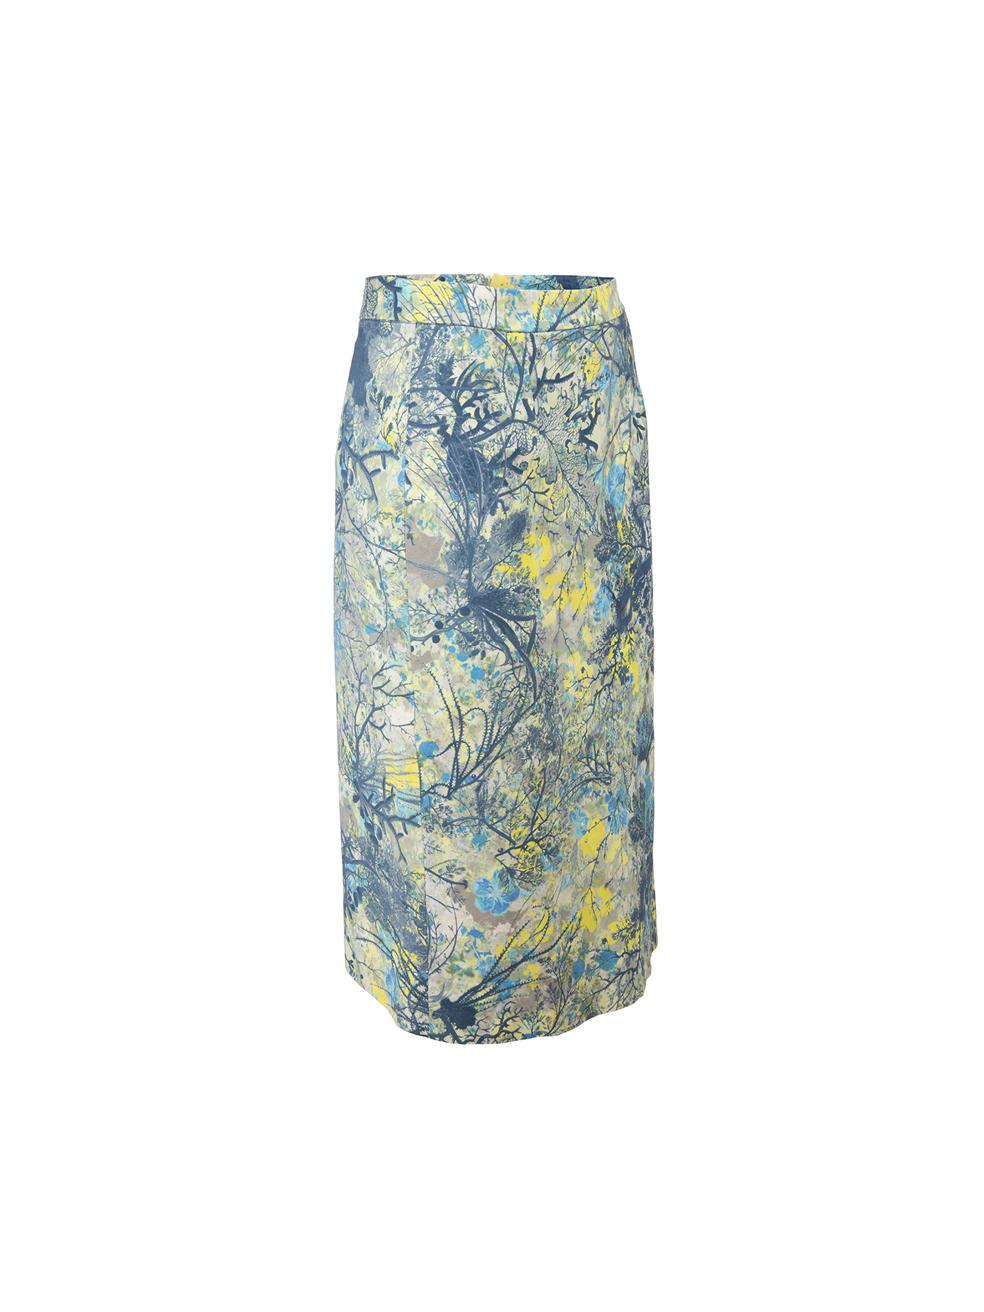 CONDITION is Very good. Minimal wear to skirt is evident. Minimal wear to the rear-slit seam with small tear on this used Erdem designer resale item.




Details


Multicolour

Cotton

Midi pencil skirt

Graphic printed

Back zip closure with hook